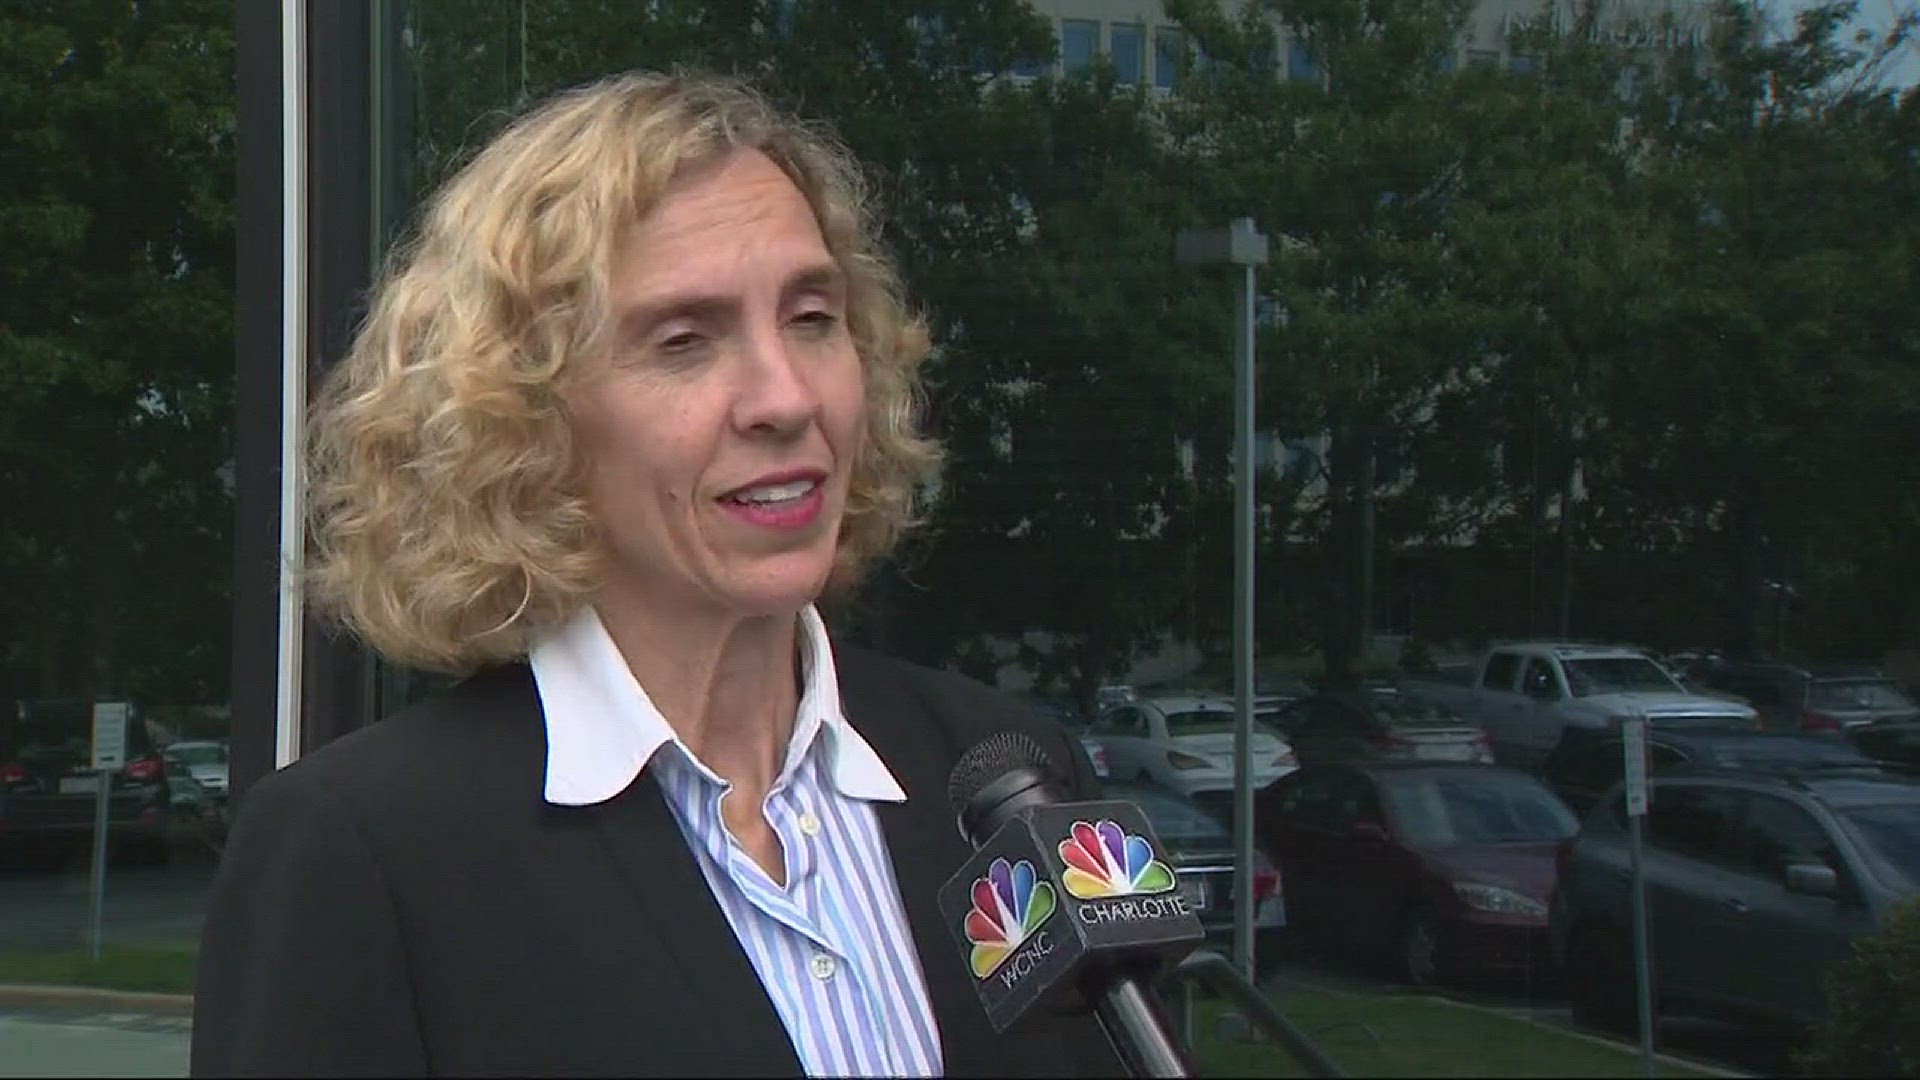 Mayor Jennifer Roberts says many of the voters in the Charlotte Democratic primary left the line for the choice of Mayor blank, indicating to her that people were torn.